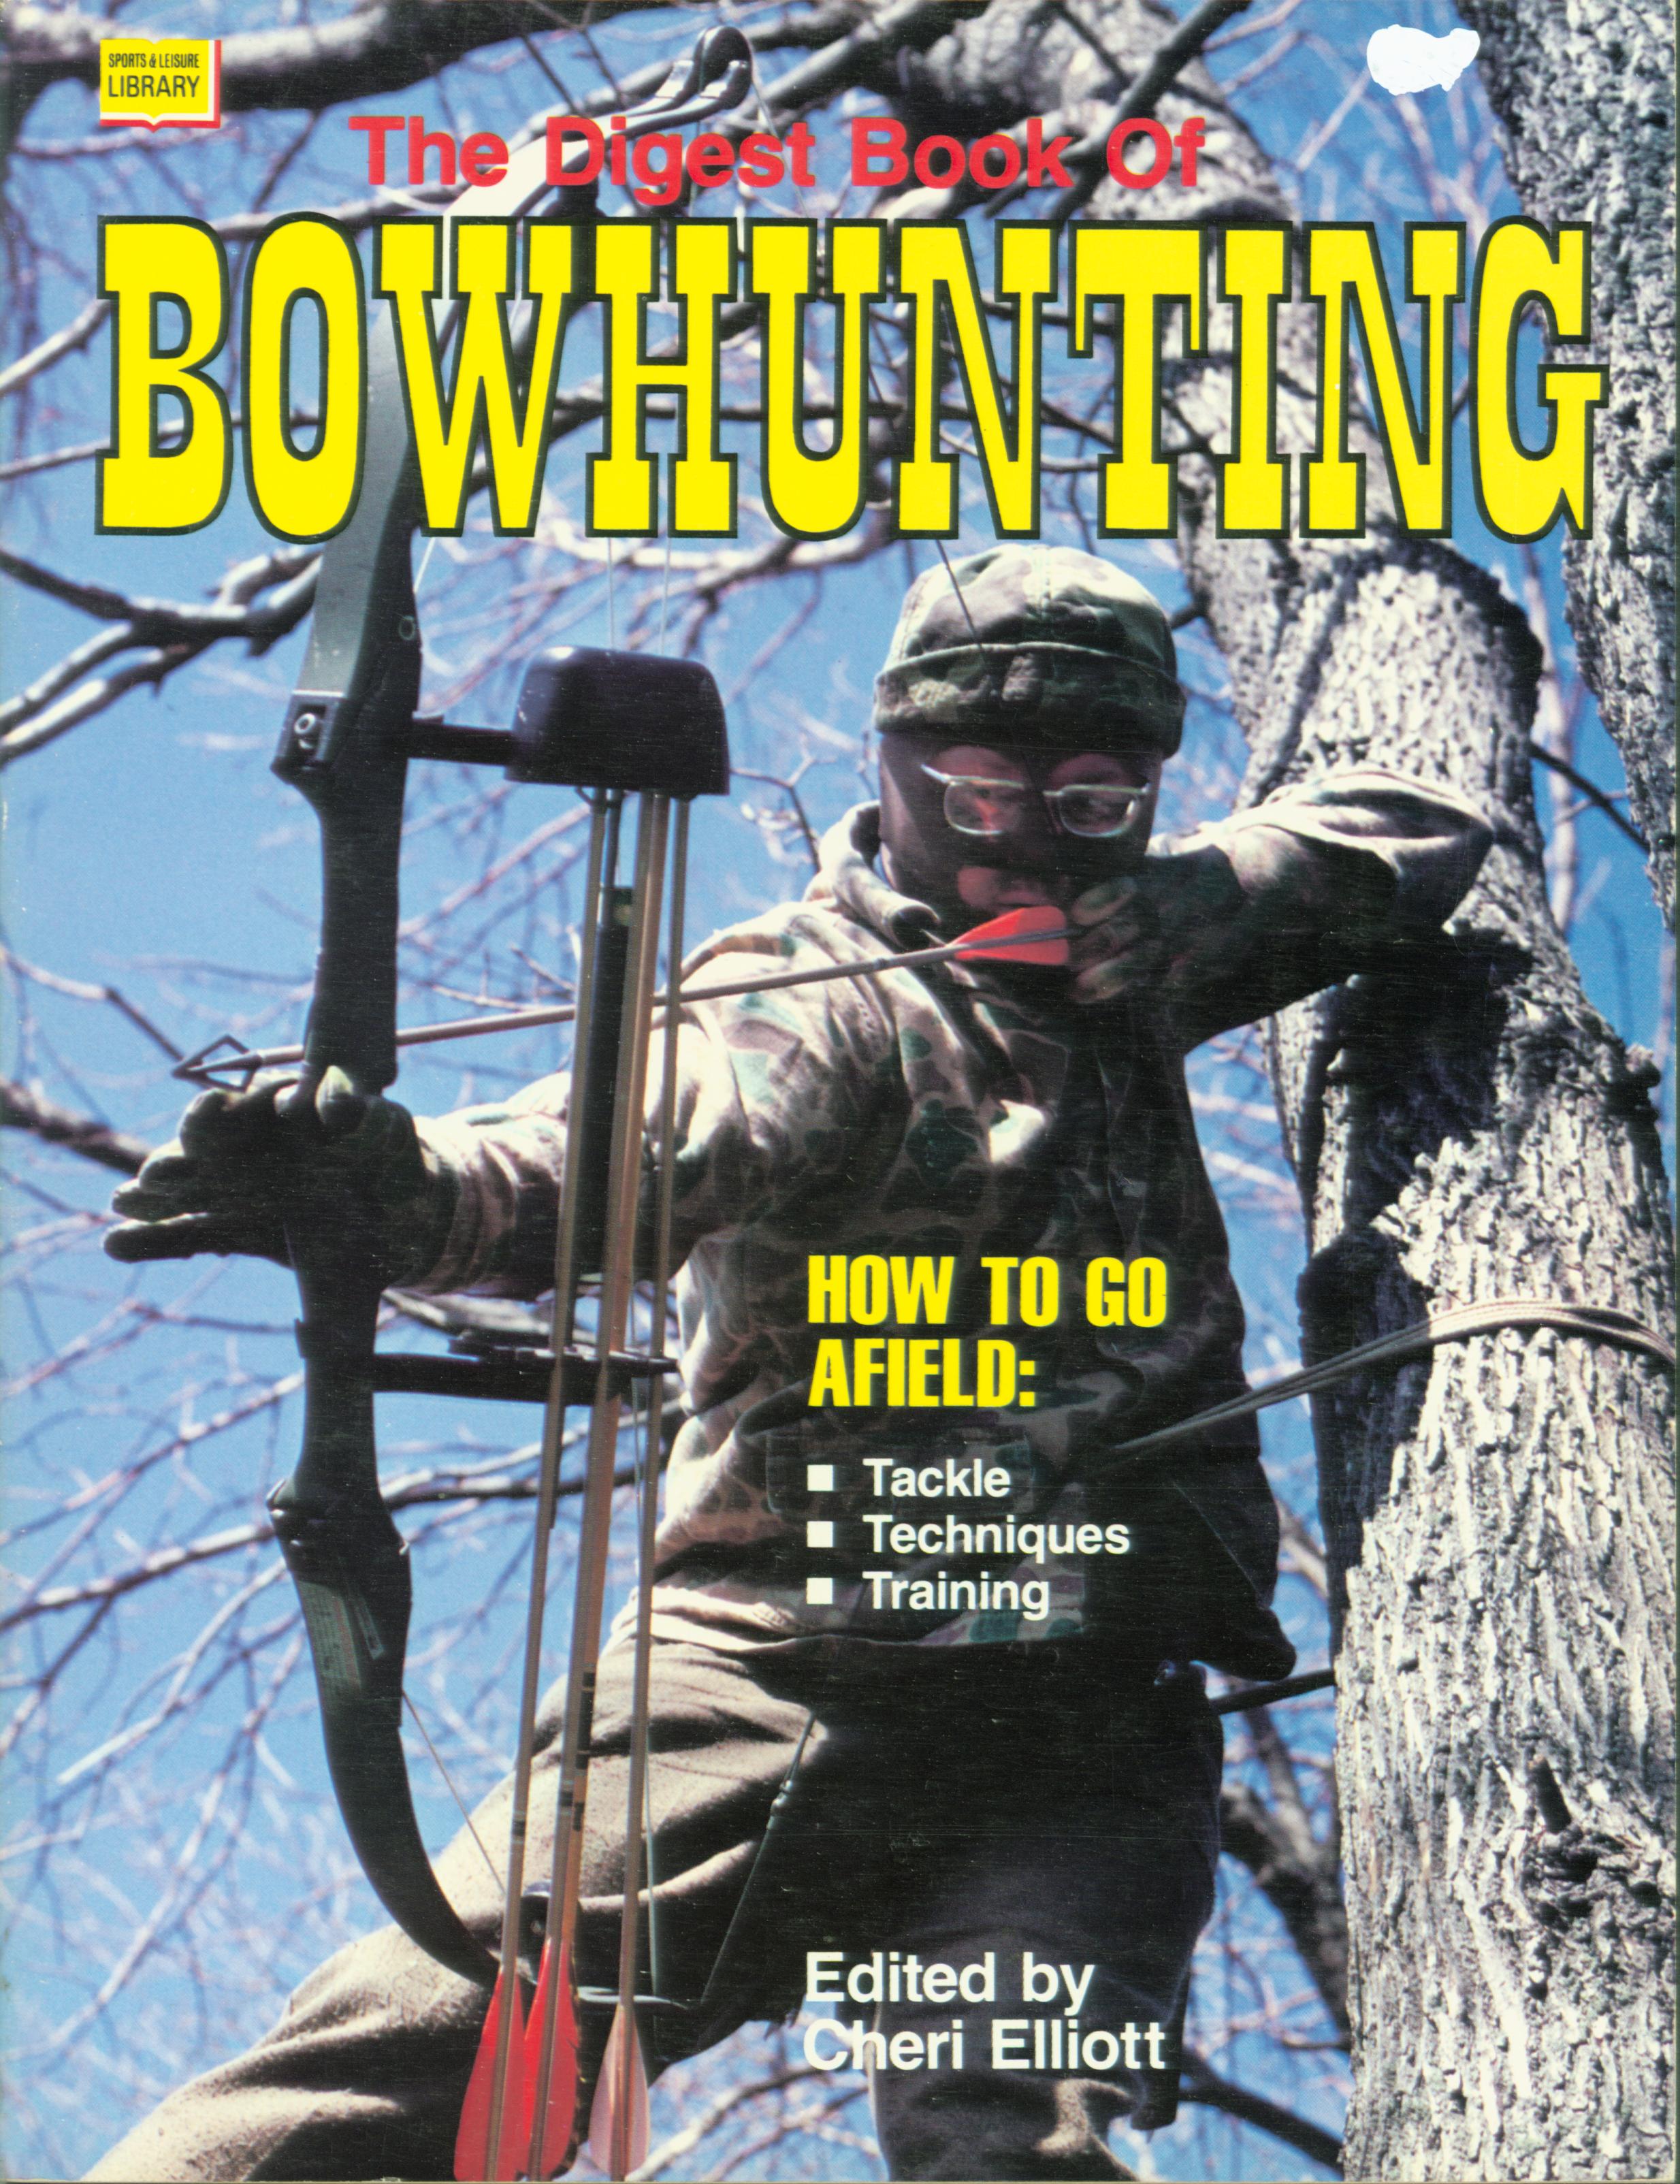 THE DIGEST BOOK OF BOWHUNTING.